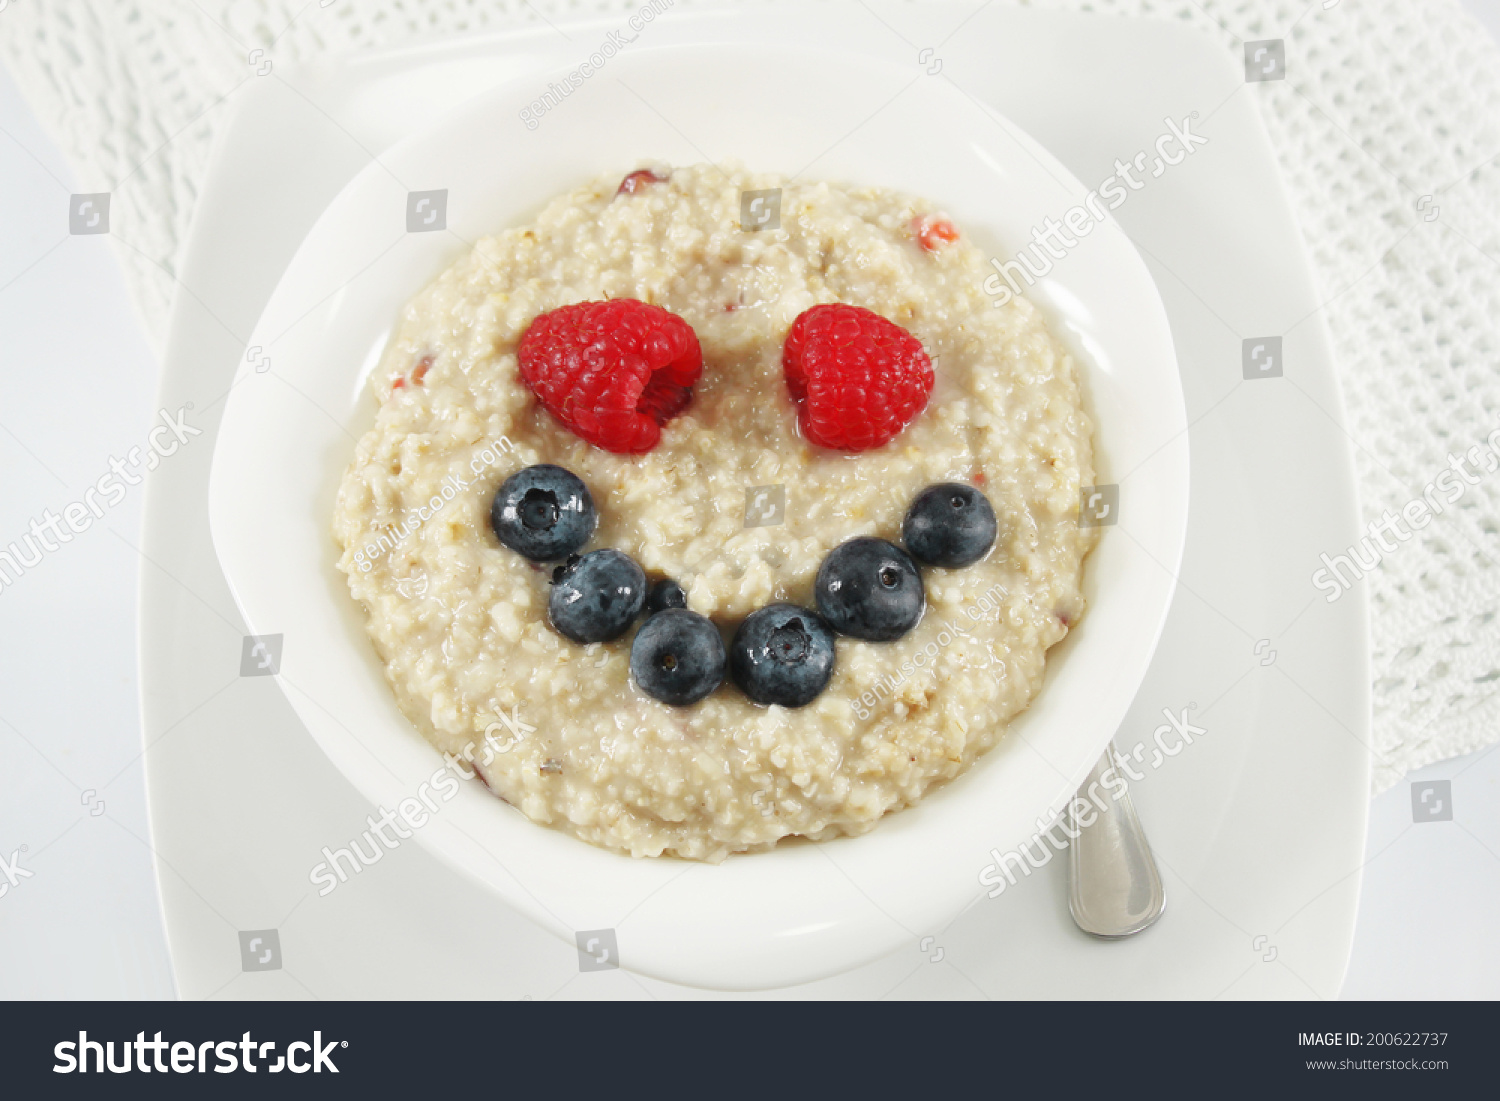 stock-photo-oatmeal-with-berries-as-a-smile-good-morning-200622737.jpg